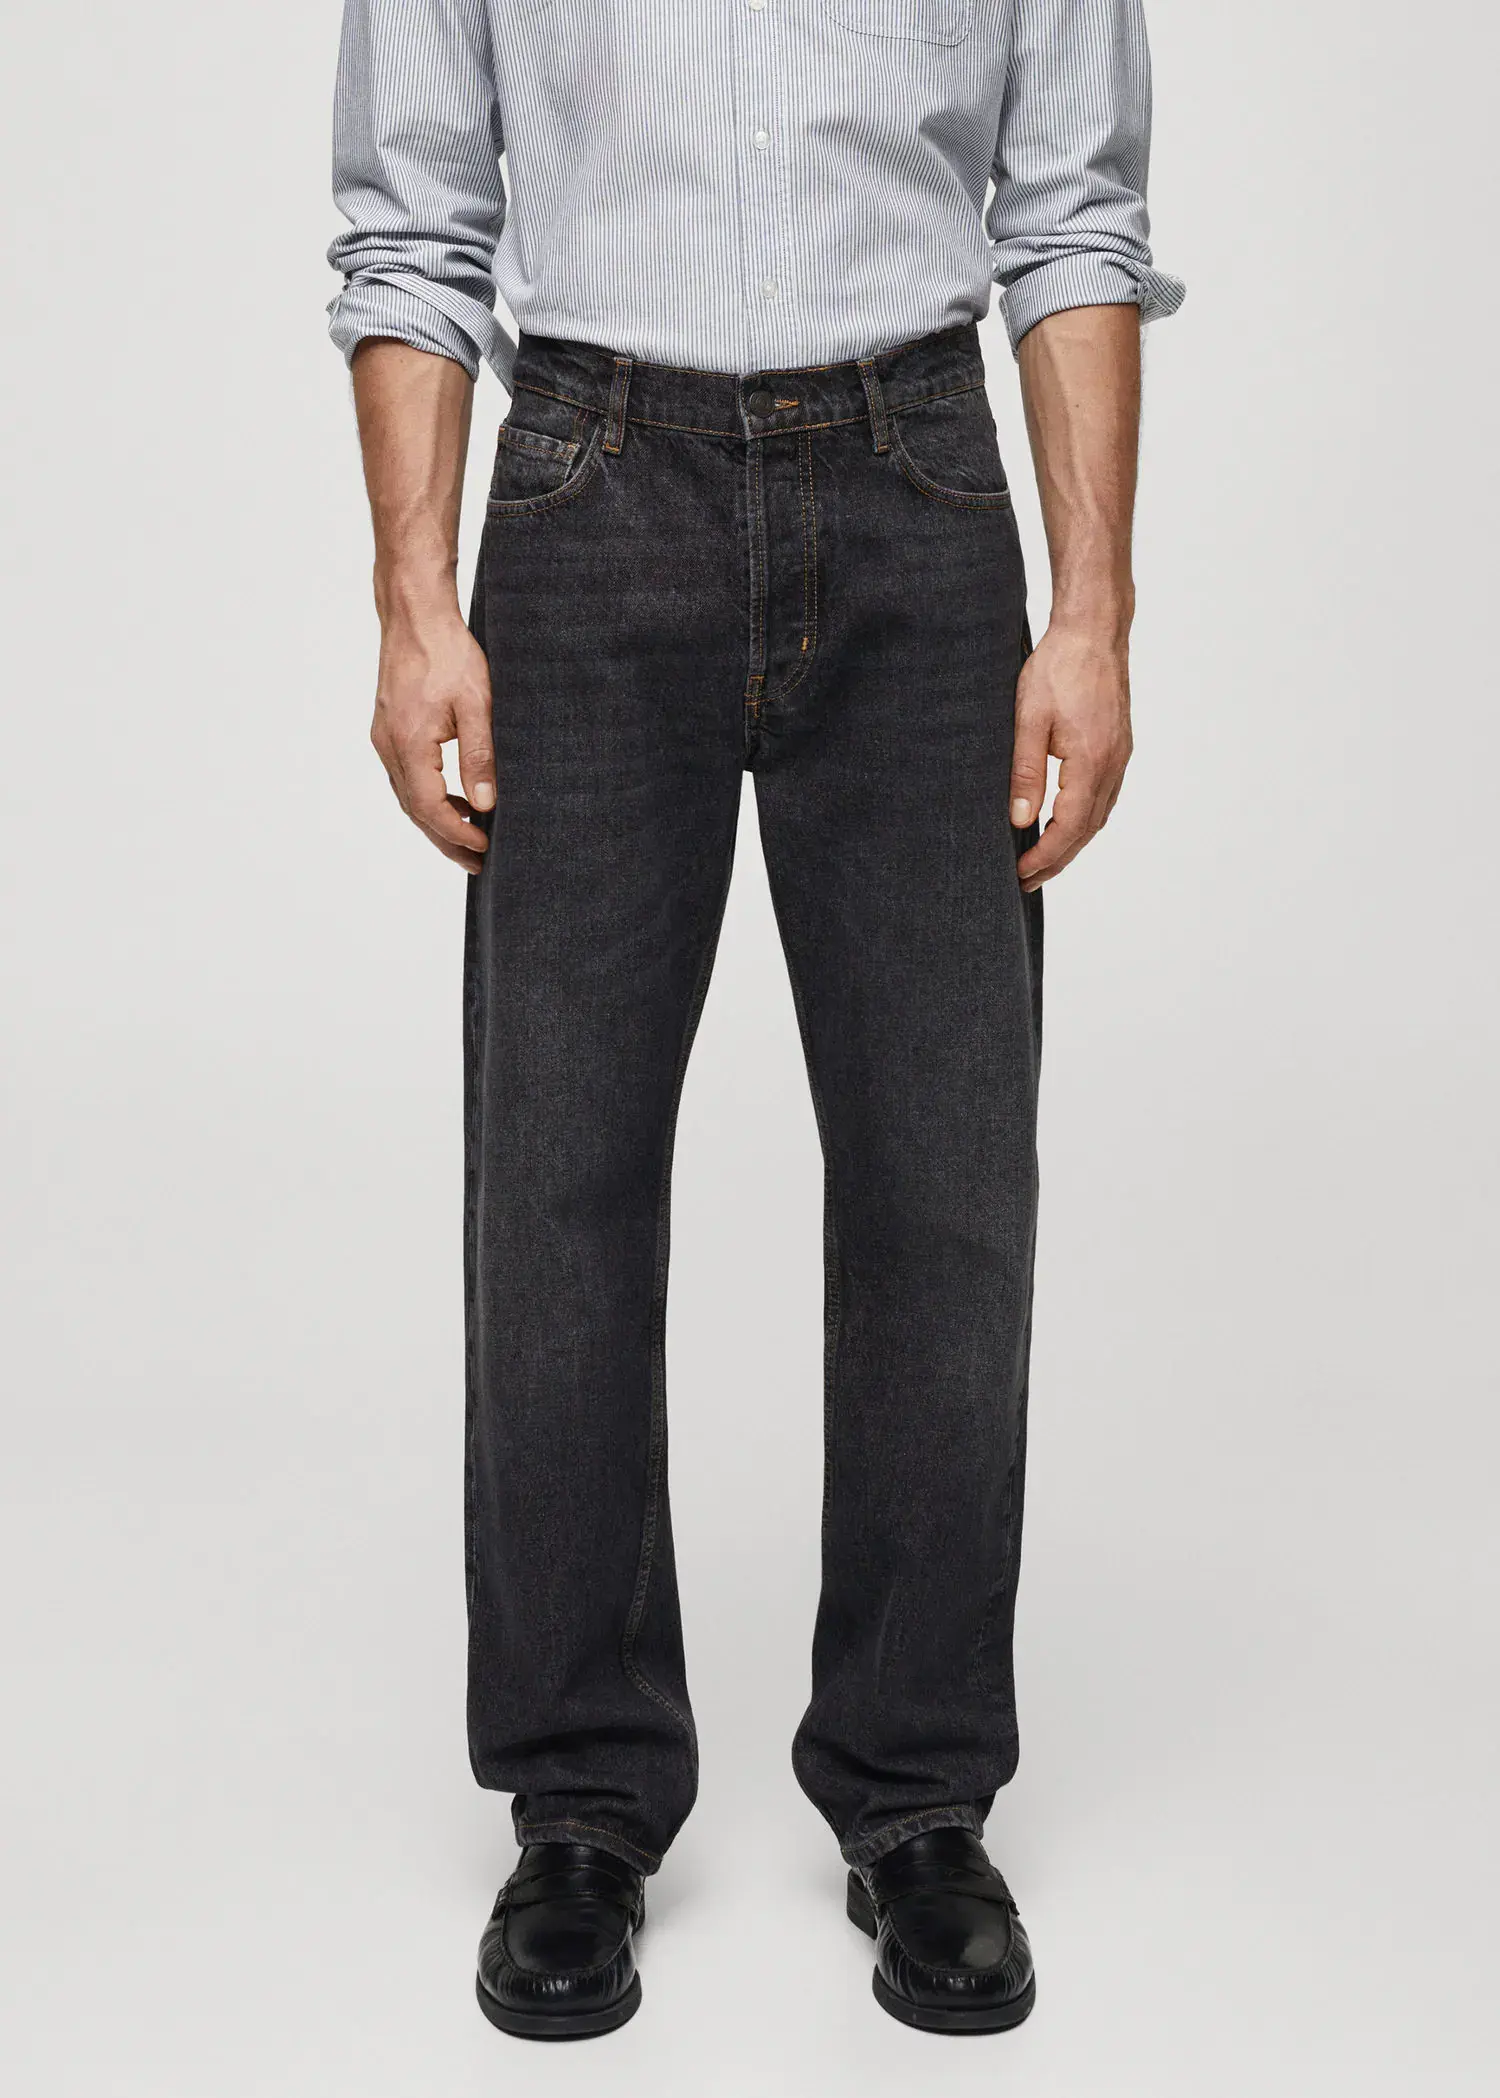 Mango Relaxed-fit dark wash jeans. 2